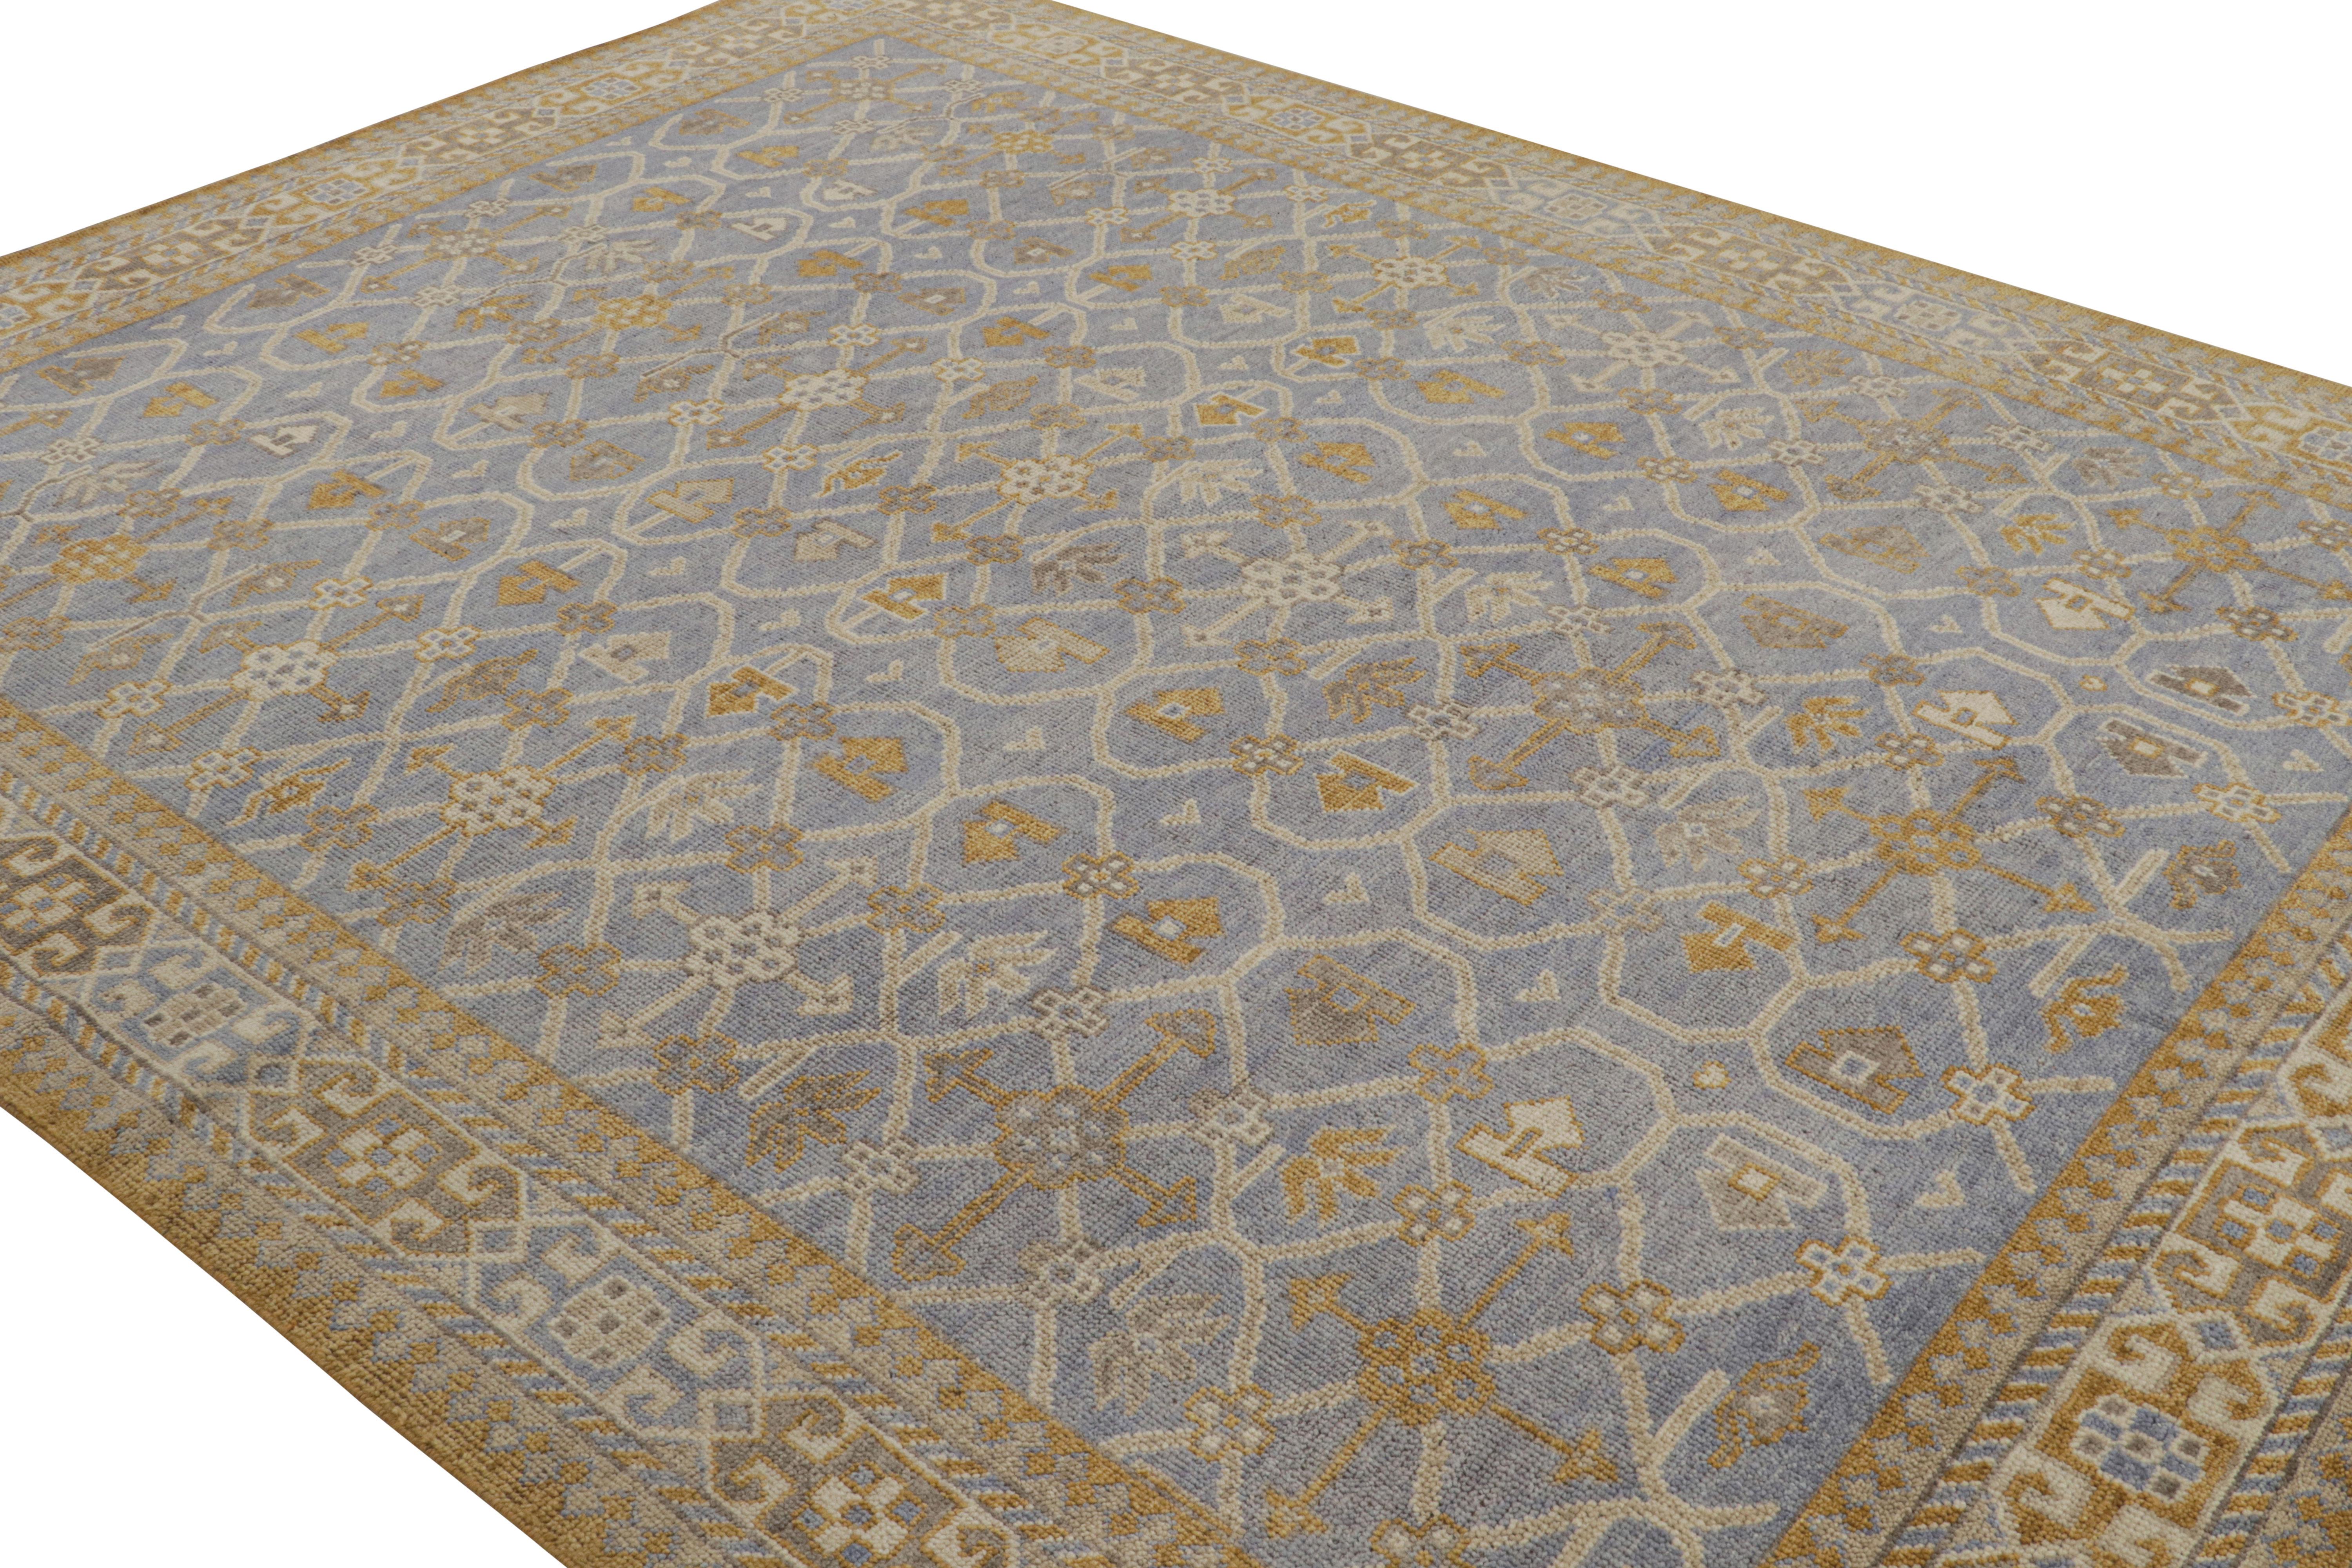 Hailing from Rug & Kilim’s Burano collection, this is an 8x10 design inspired by Samarkand rugs. Handknotted in Ghazni wool.

On the Design: 

Keen eyes will note the blue field underscoring gold and beige-brown geometric patterns - enfolded by a